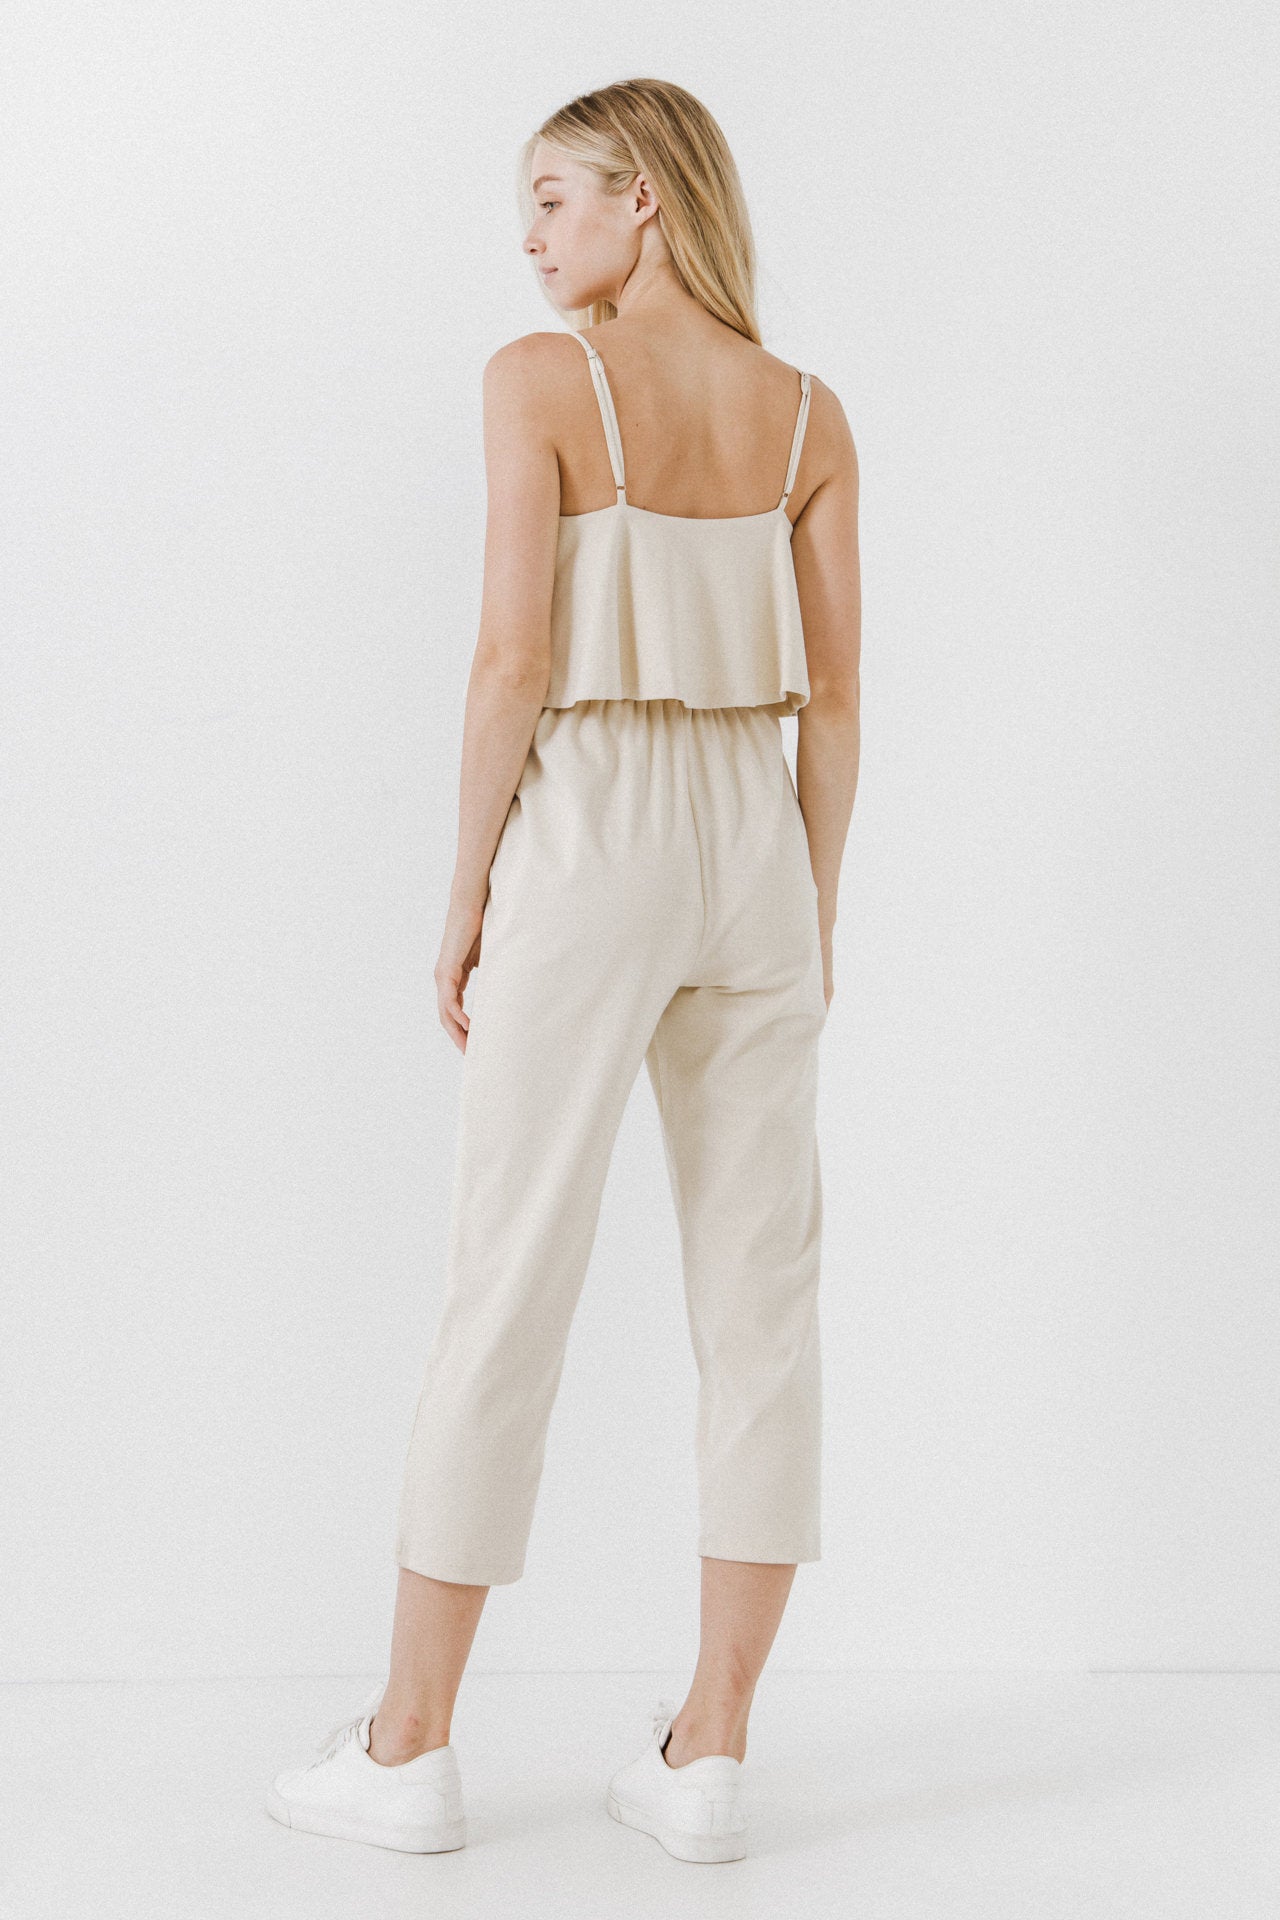 LA'VEN - Knit Sleeveless Jumpsuit - JUMPSUITS available at Objectrare